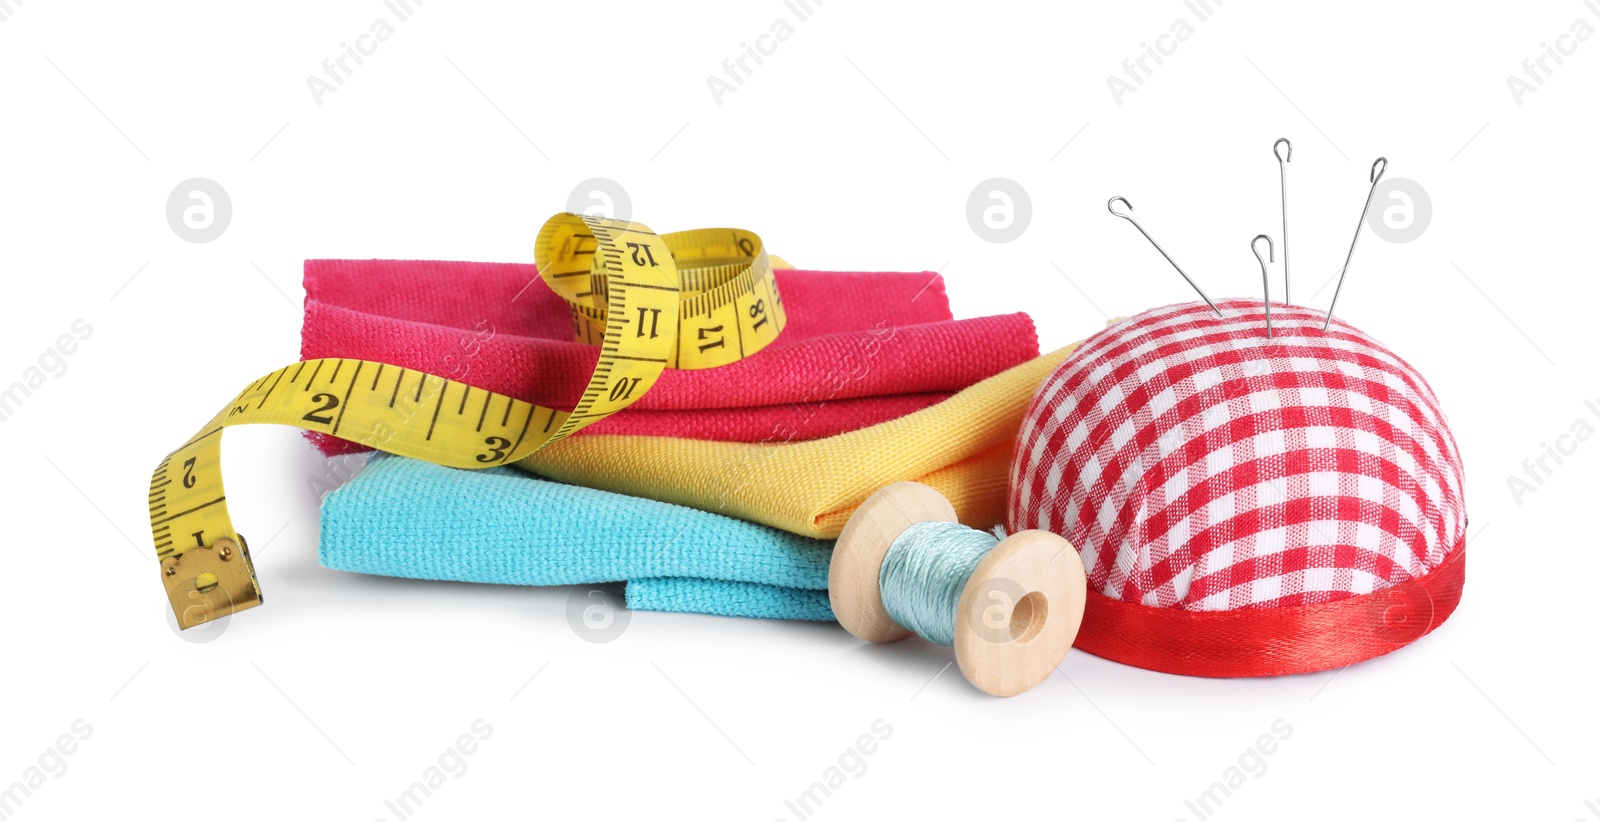 Photo of Pincushion, sewing needles, pieces of fabrics, spool of thread and measuring tape isolated on white